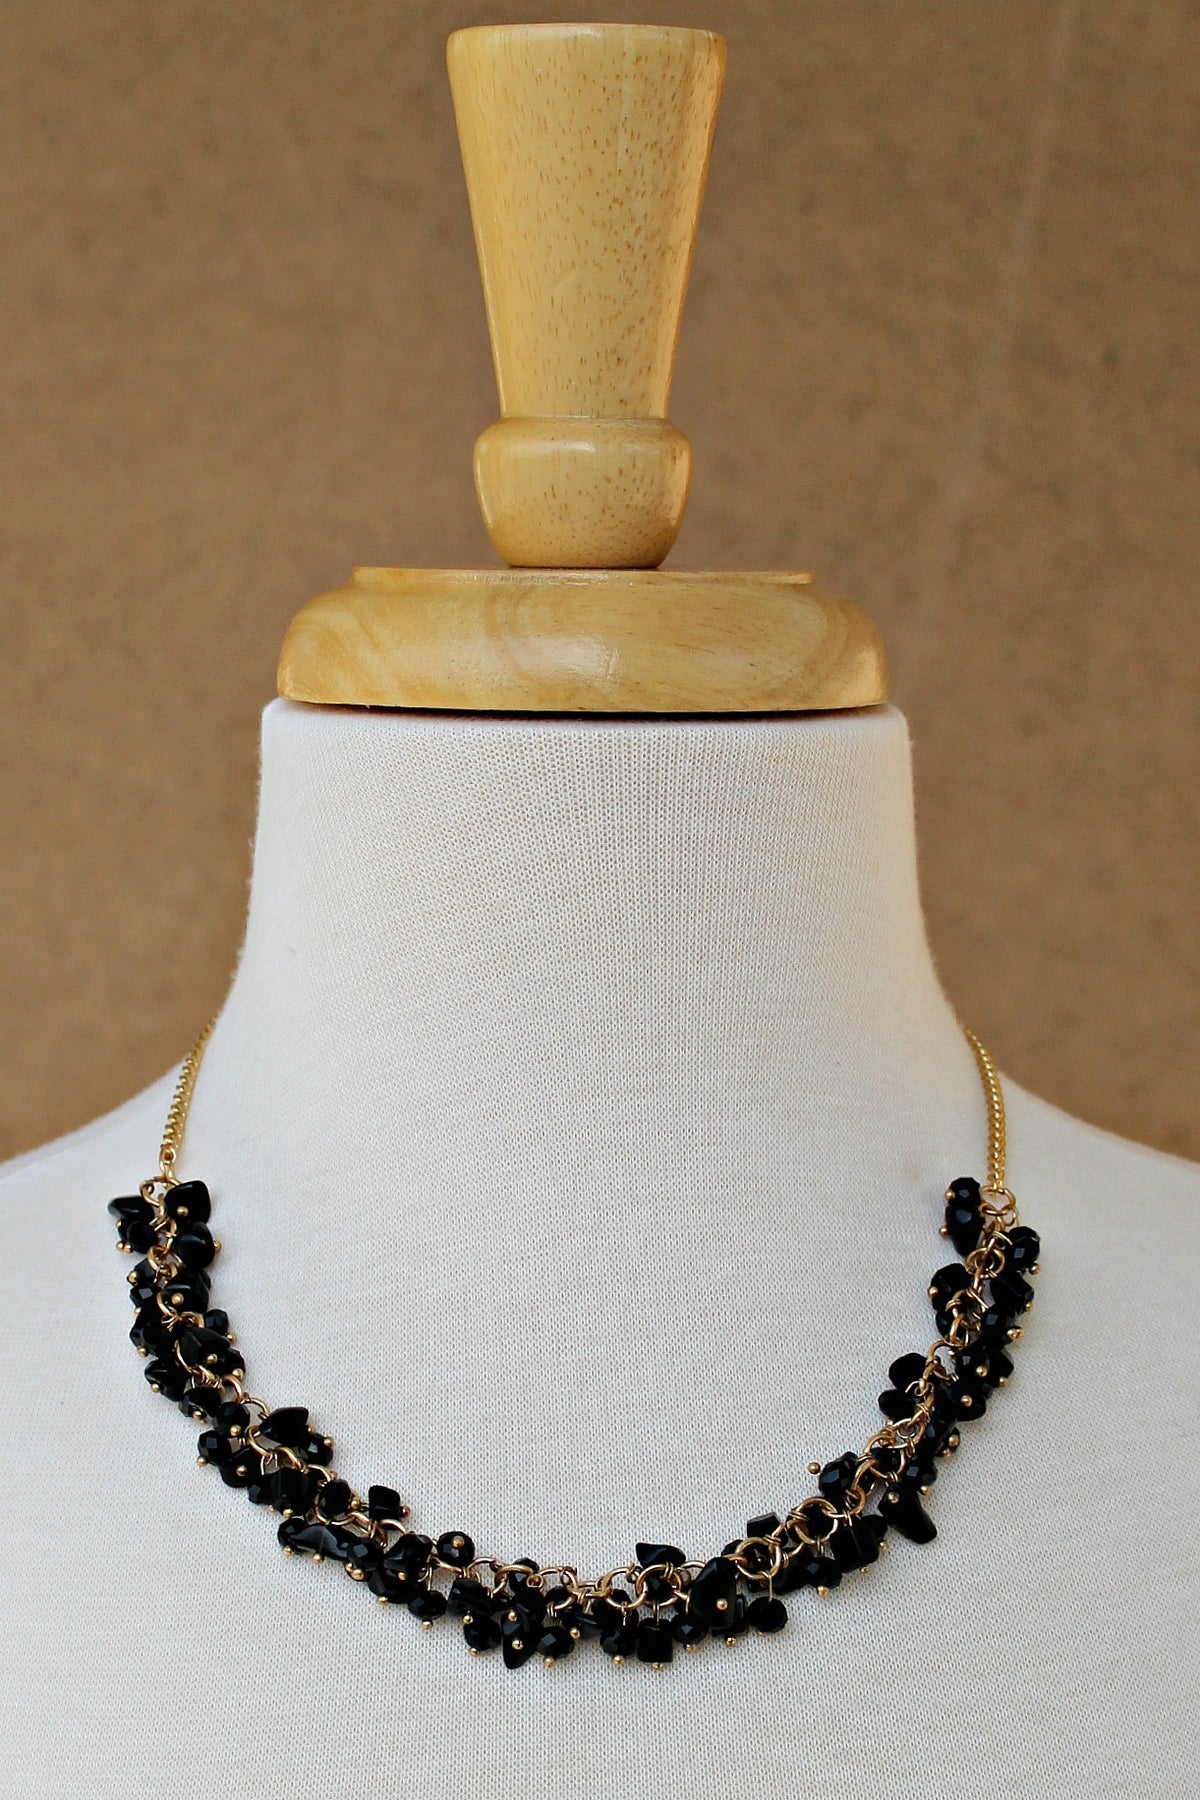 Cluster Chip Beads Necklace, Black